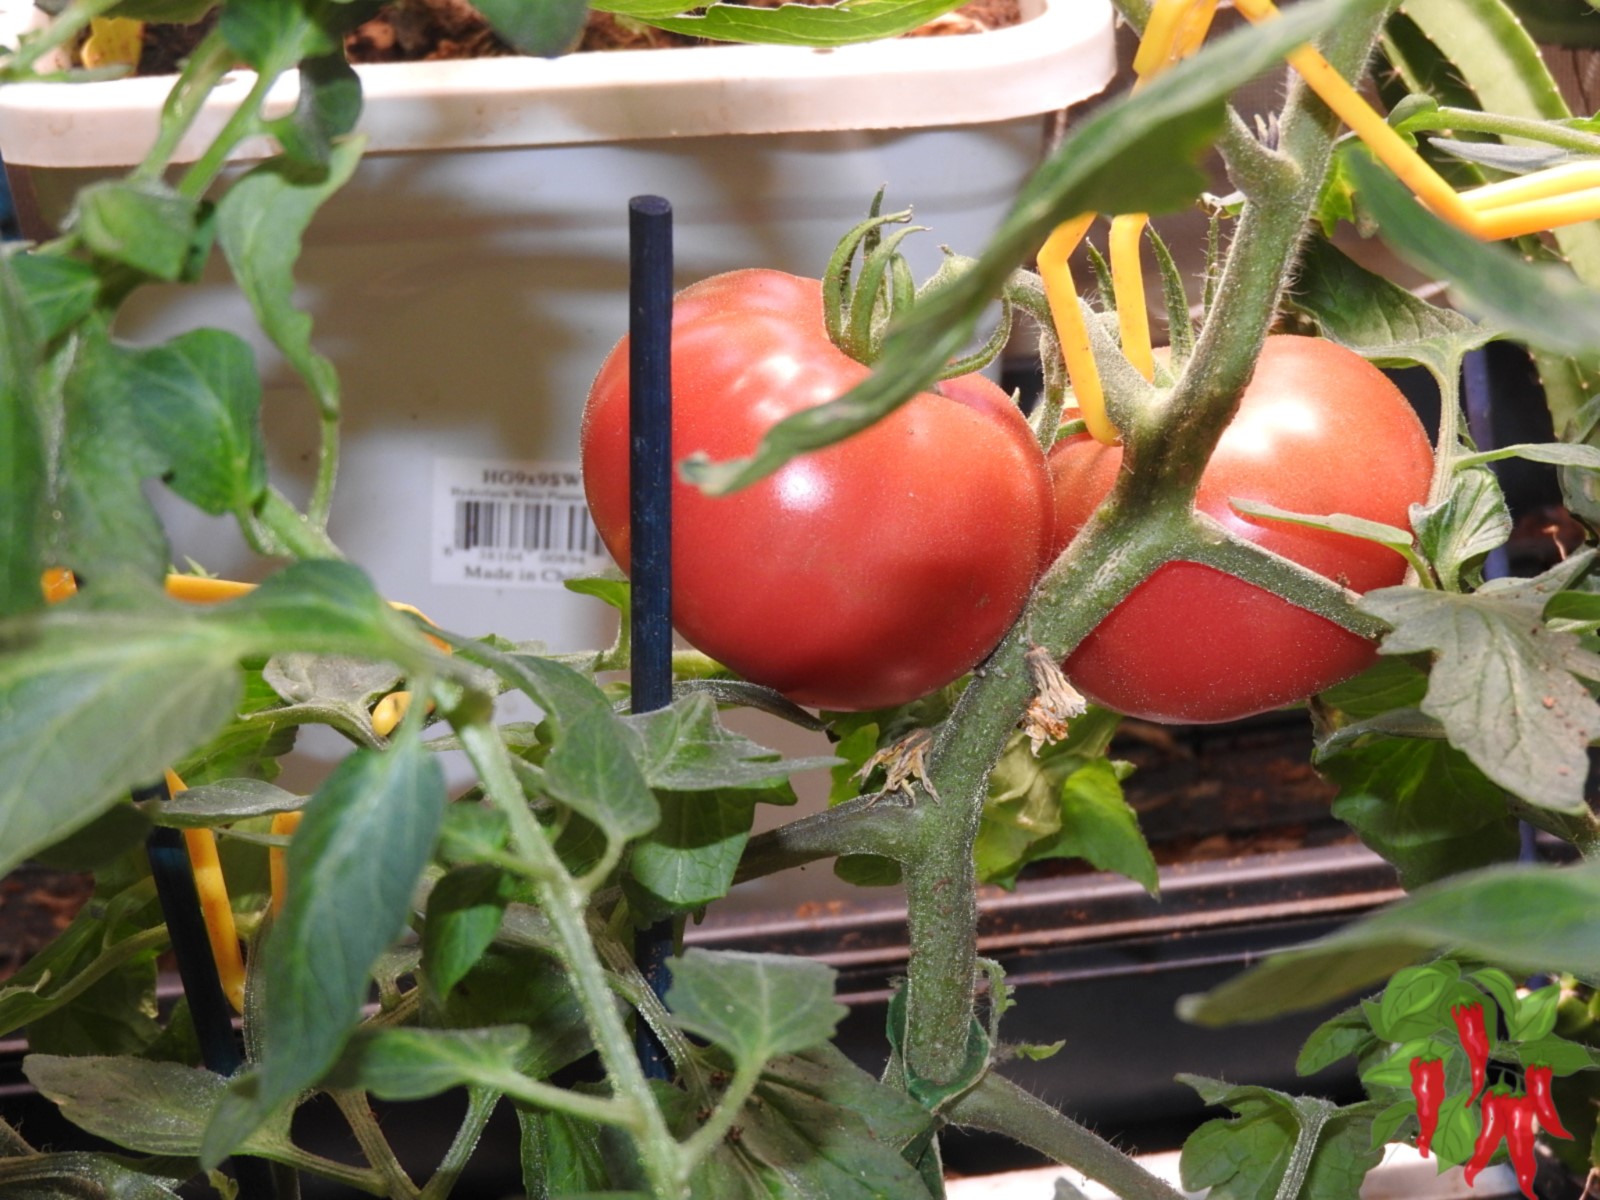 How To Grow Tomatoes In a Kitchen Garden